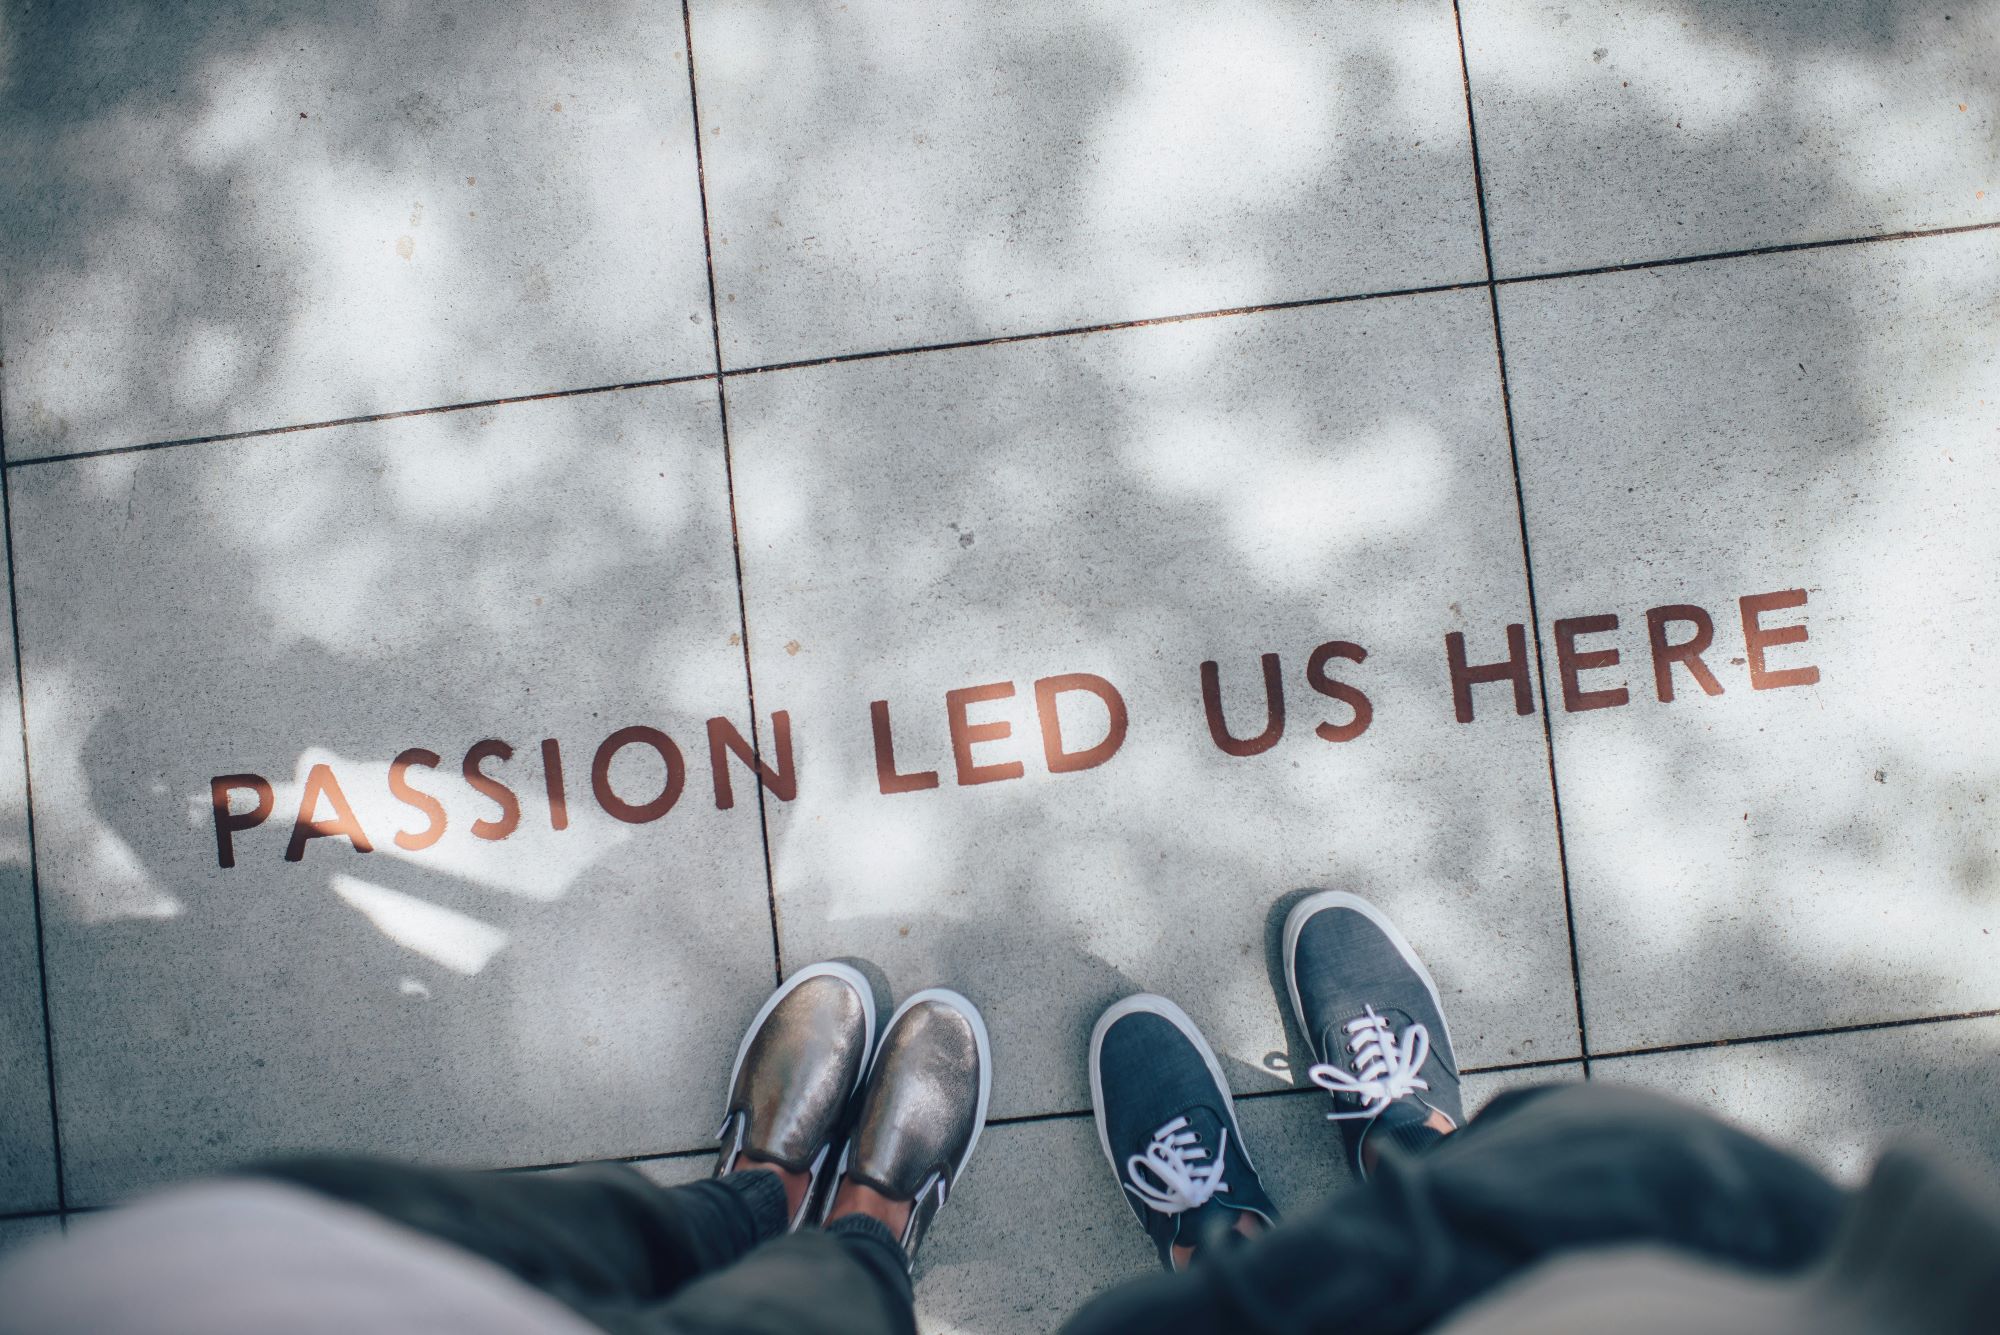 Two people's feet standing next to a sign on the ground that says "passion led us here"